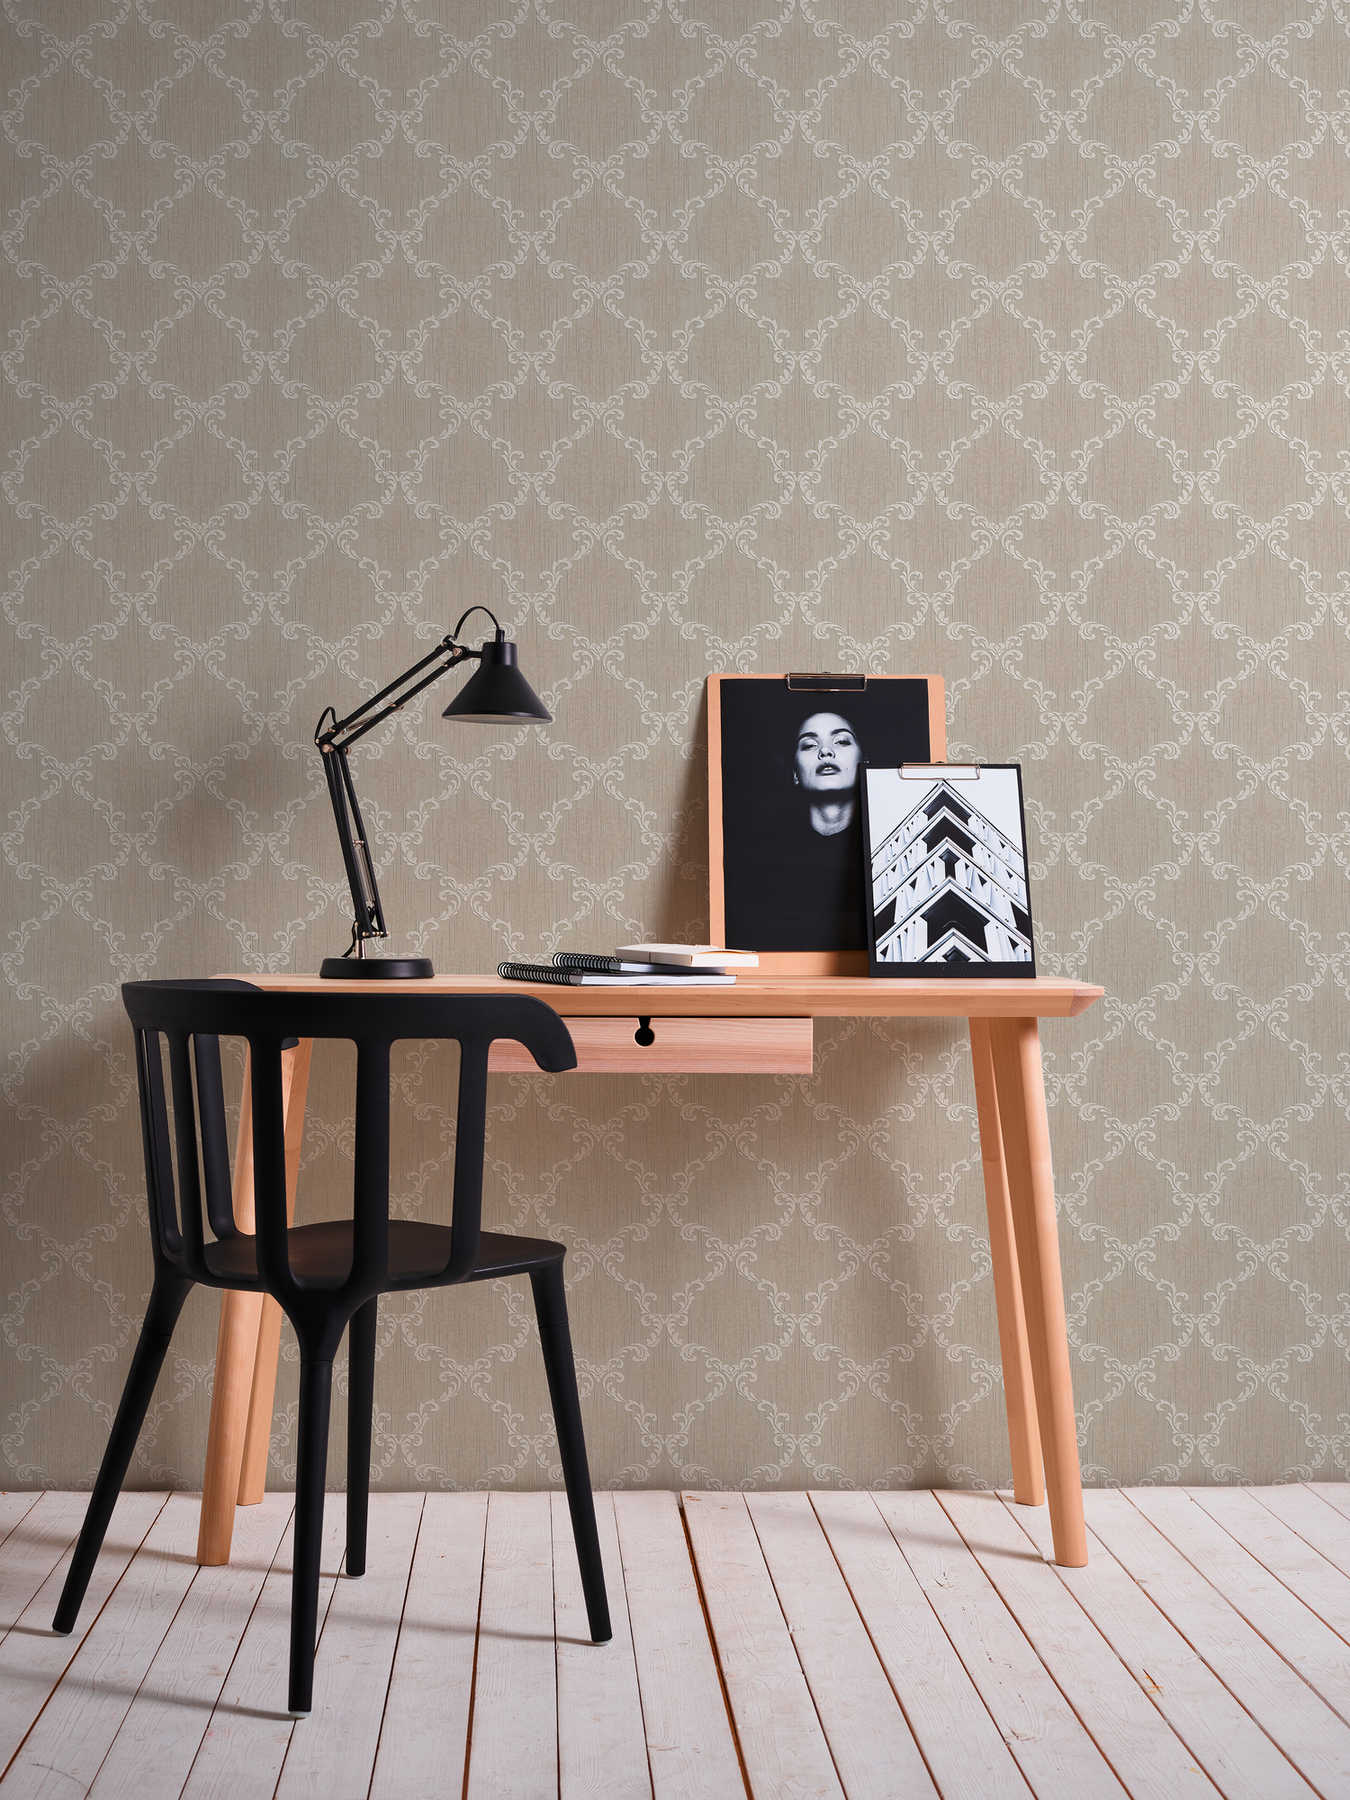             Ornamental wallpaper with tendril pattern & texture effect - beige
        